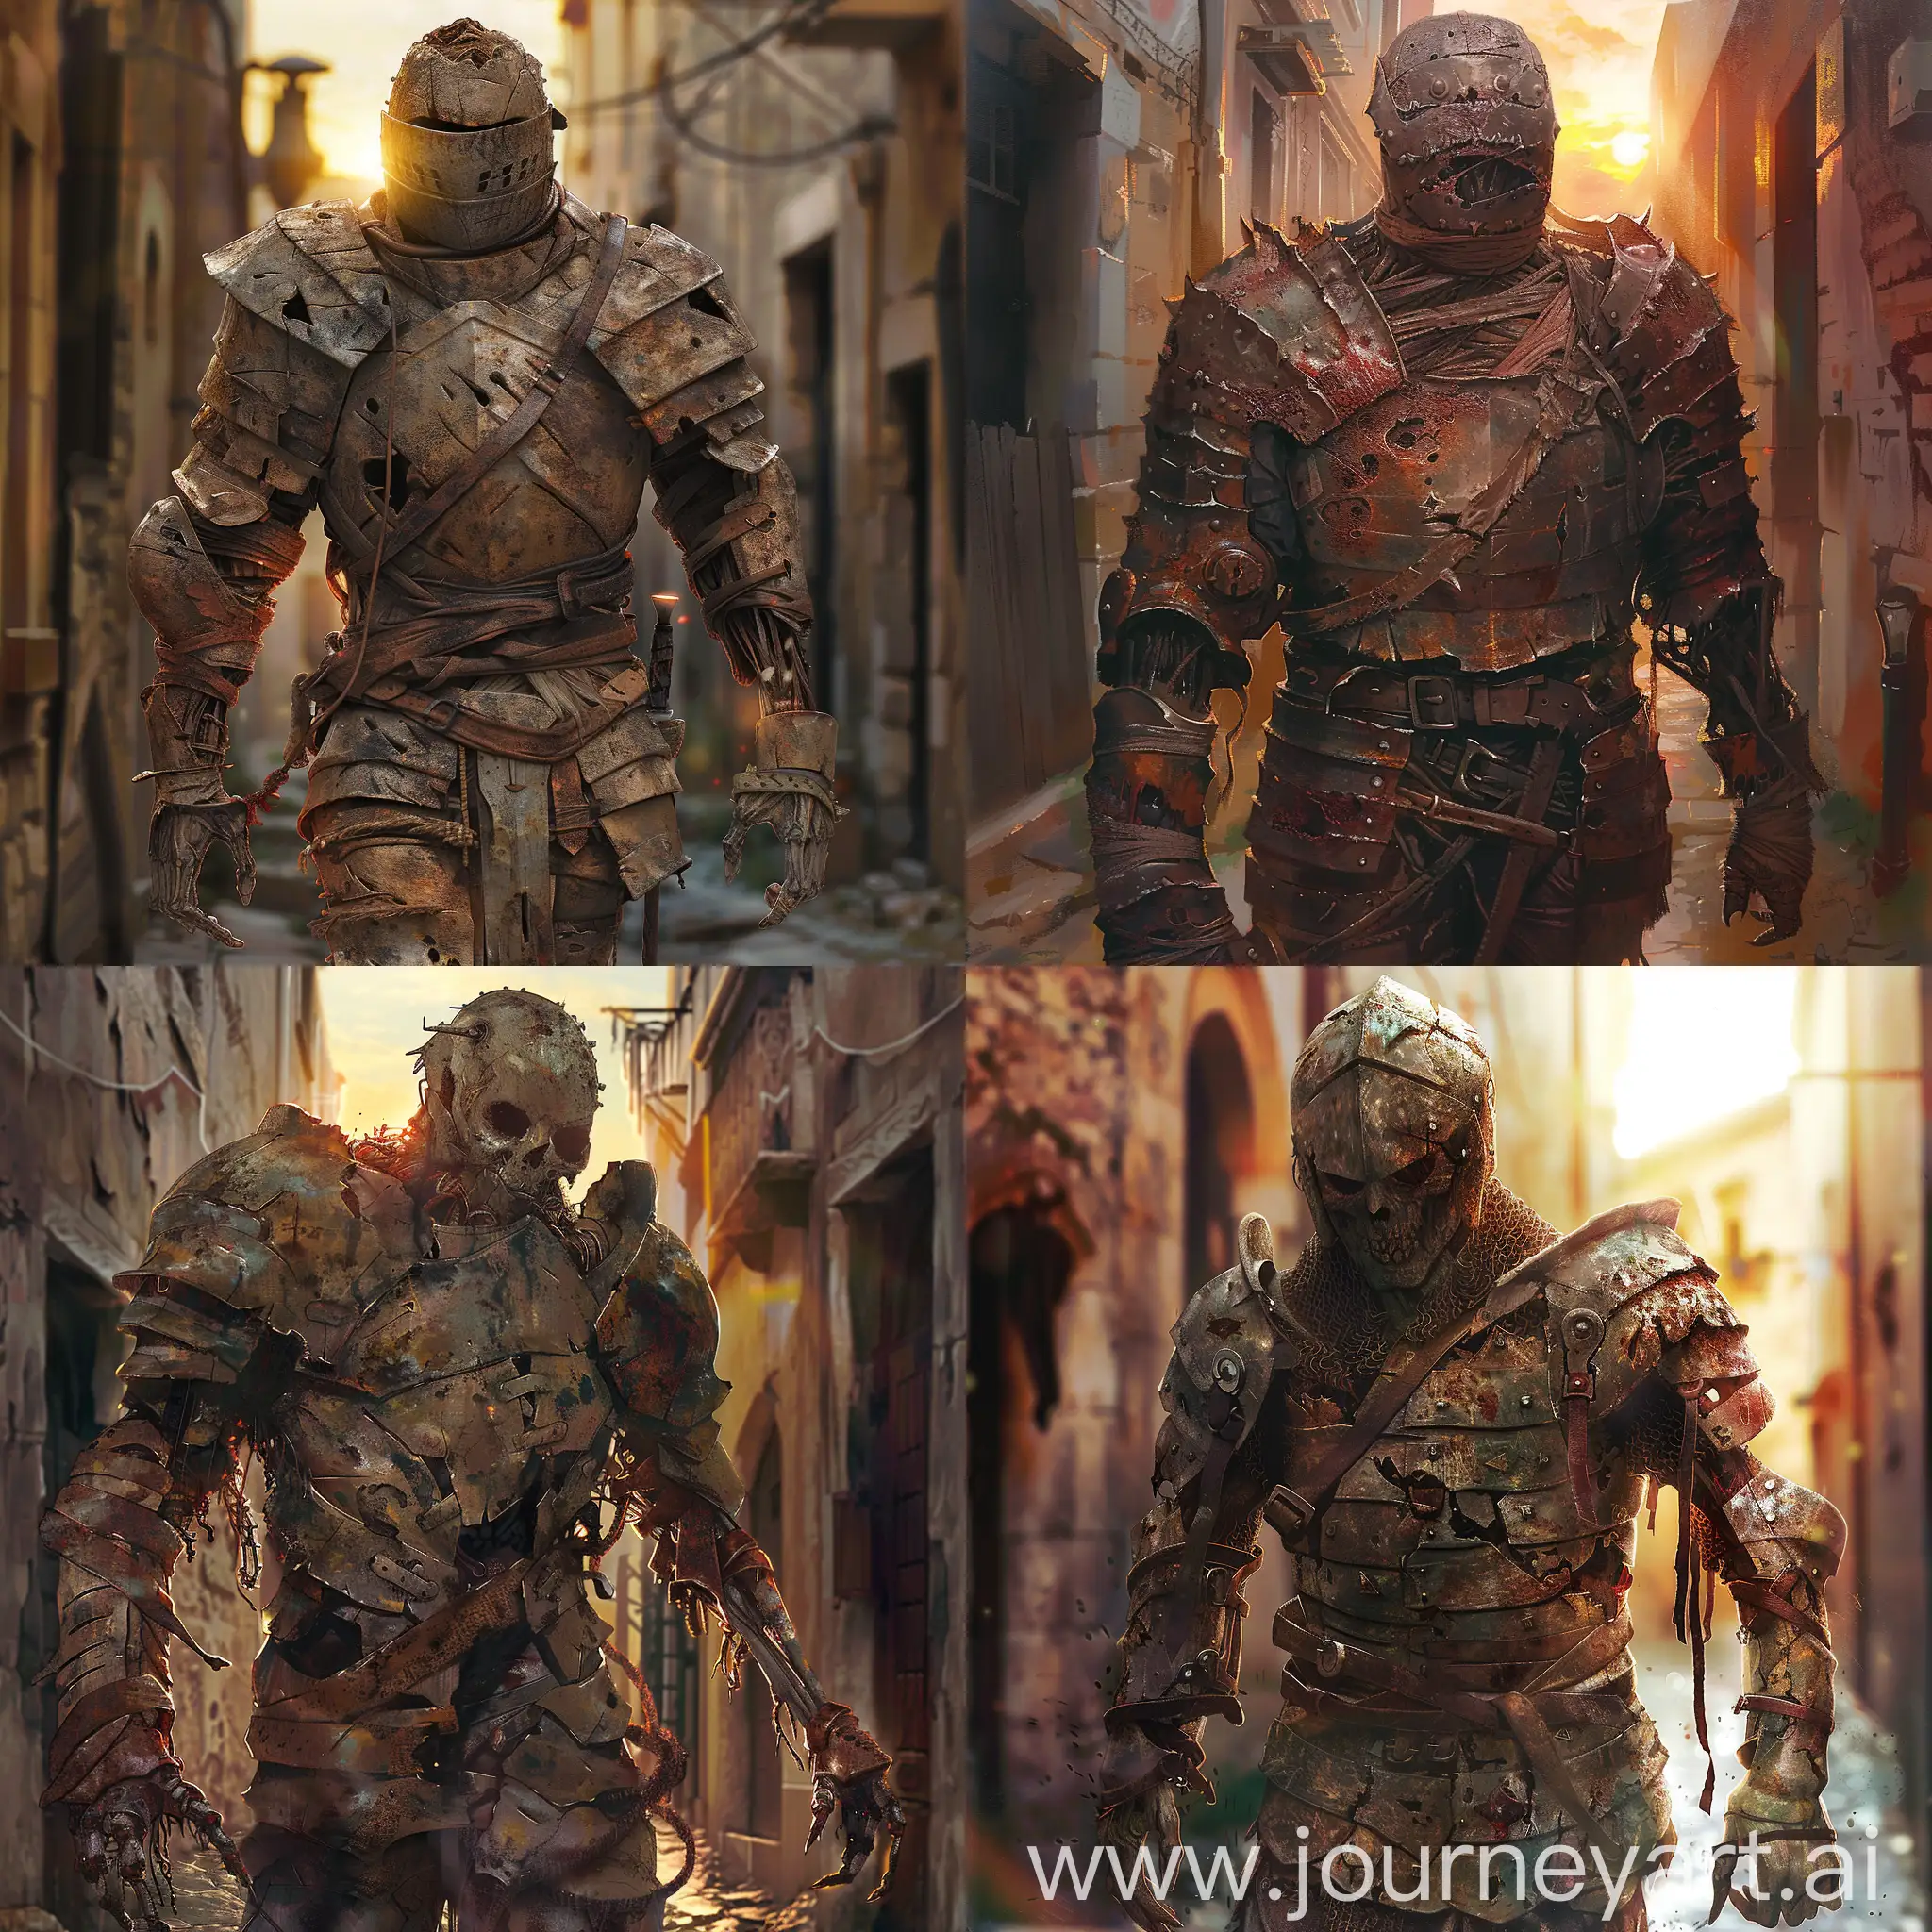 Undead-Knight-in-Rusted-Plate-Armor-Walking-through-Sunset-Alley